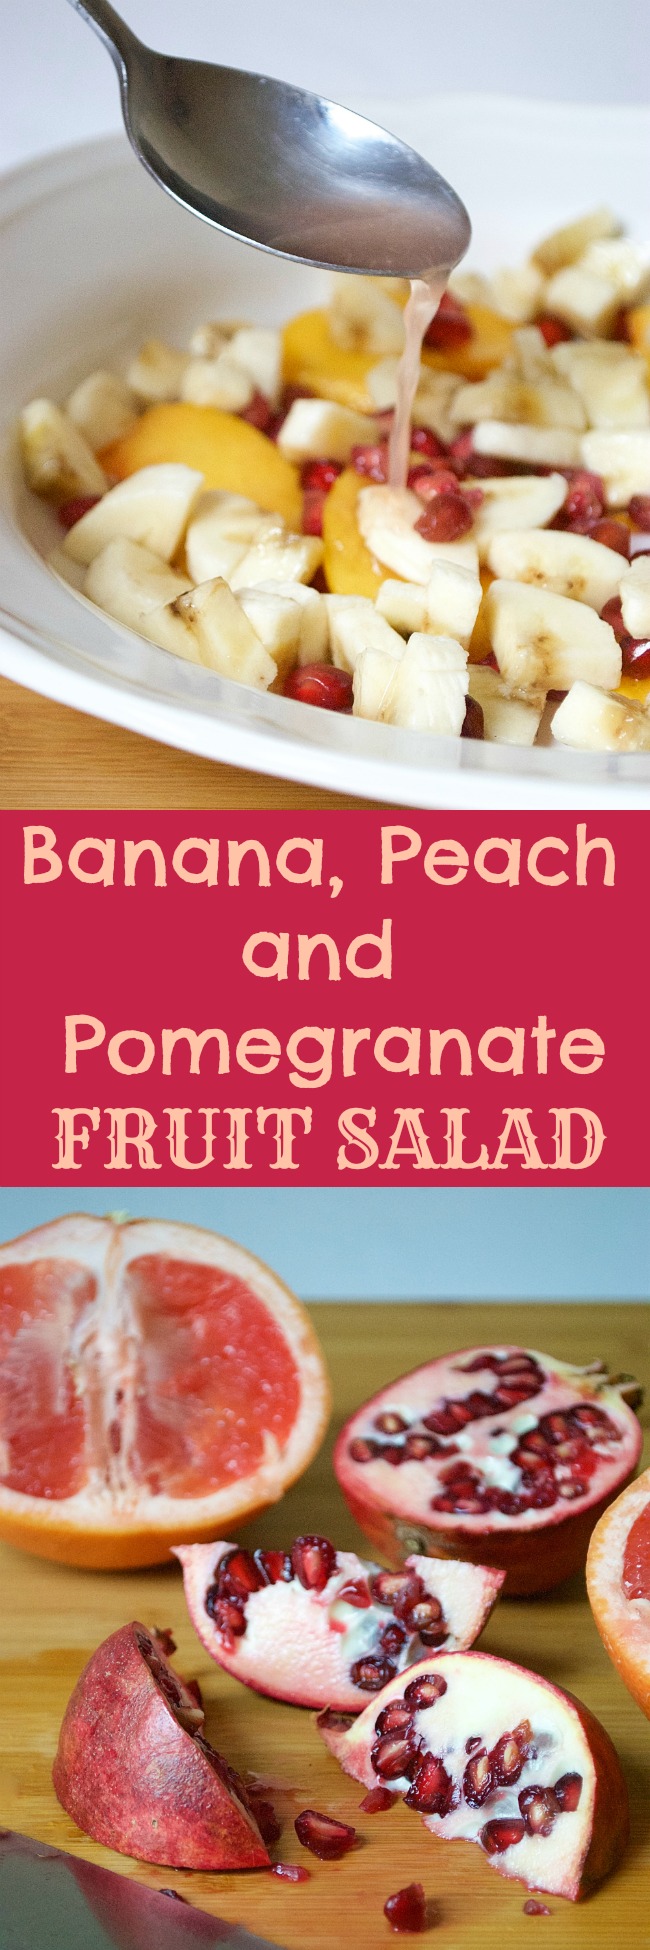 Banana, Peach and Pomegranate Fruit Salad. This fruit salad is so delicious and refreshing- not to mention versatile! Try using as a topping for yogurt or simply on its own for a healthy boost!